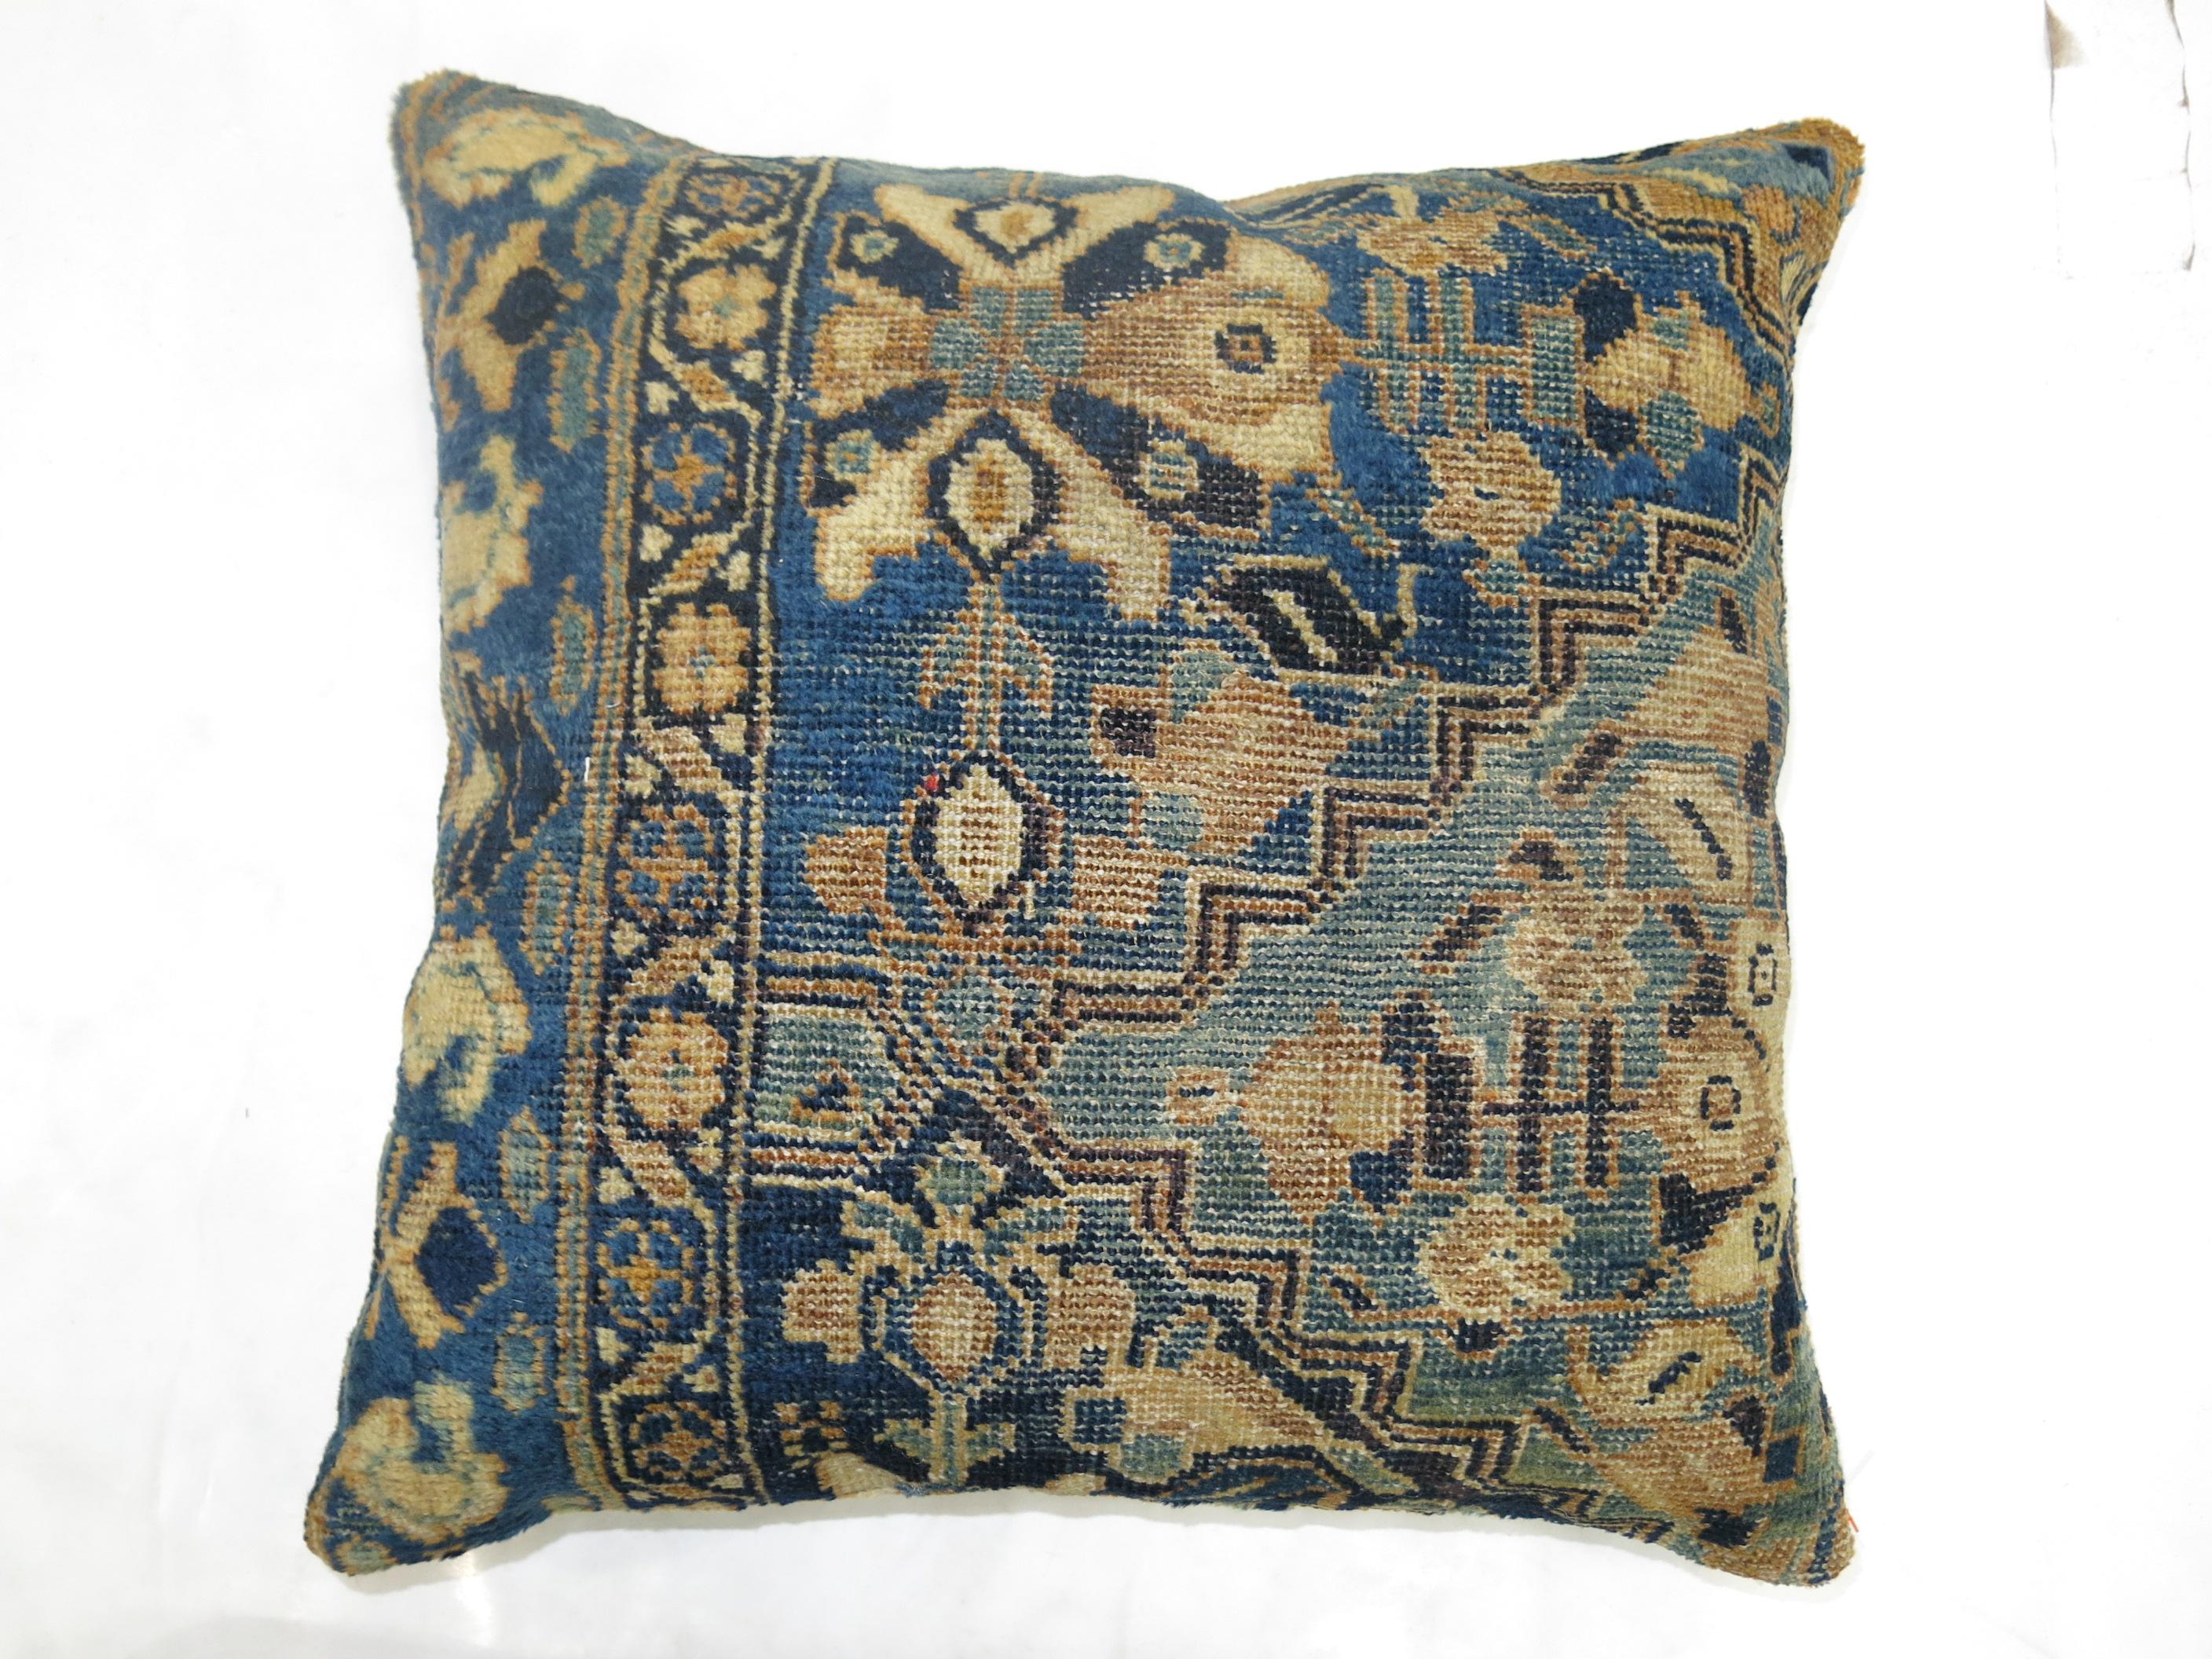 Pillow made from an antique Persian Tabriz rug in lovely blue color.